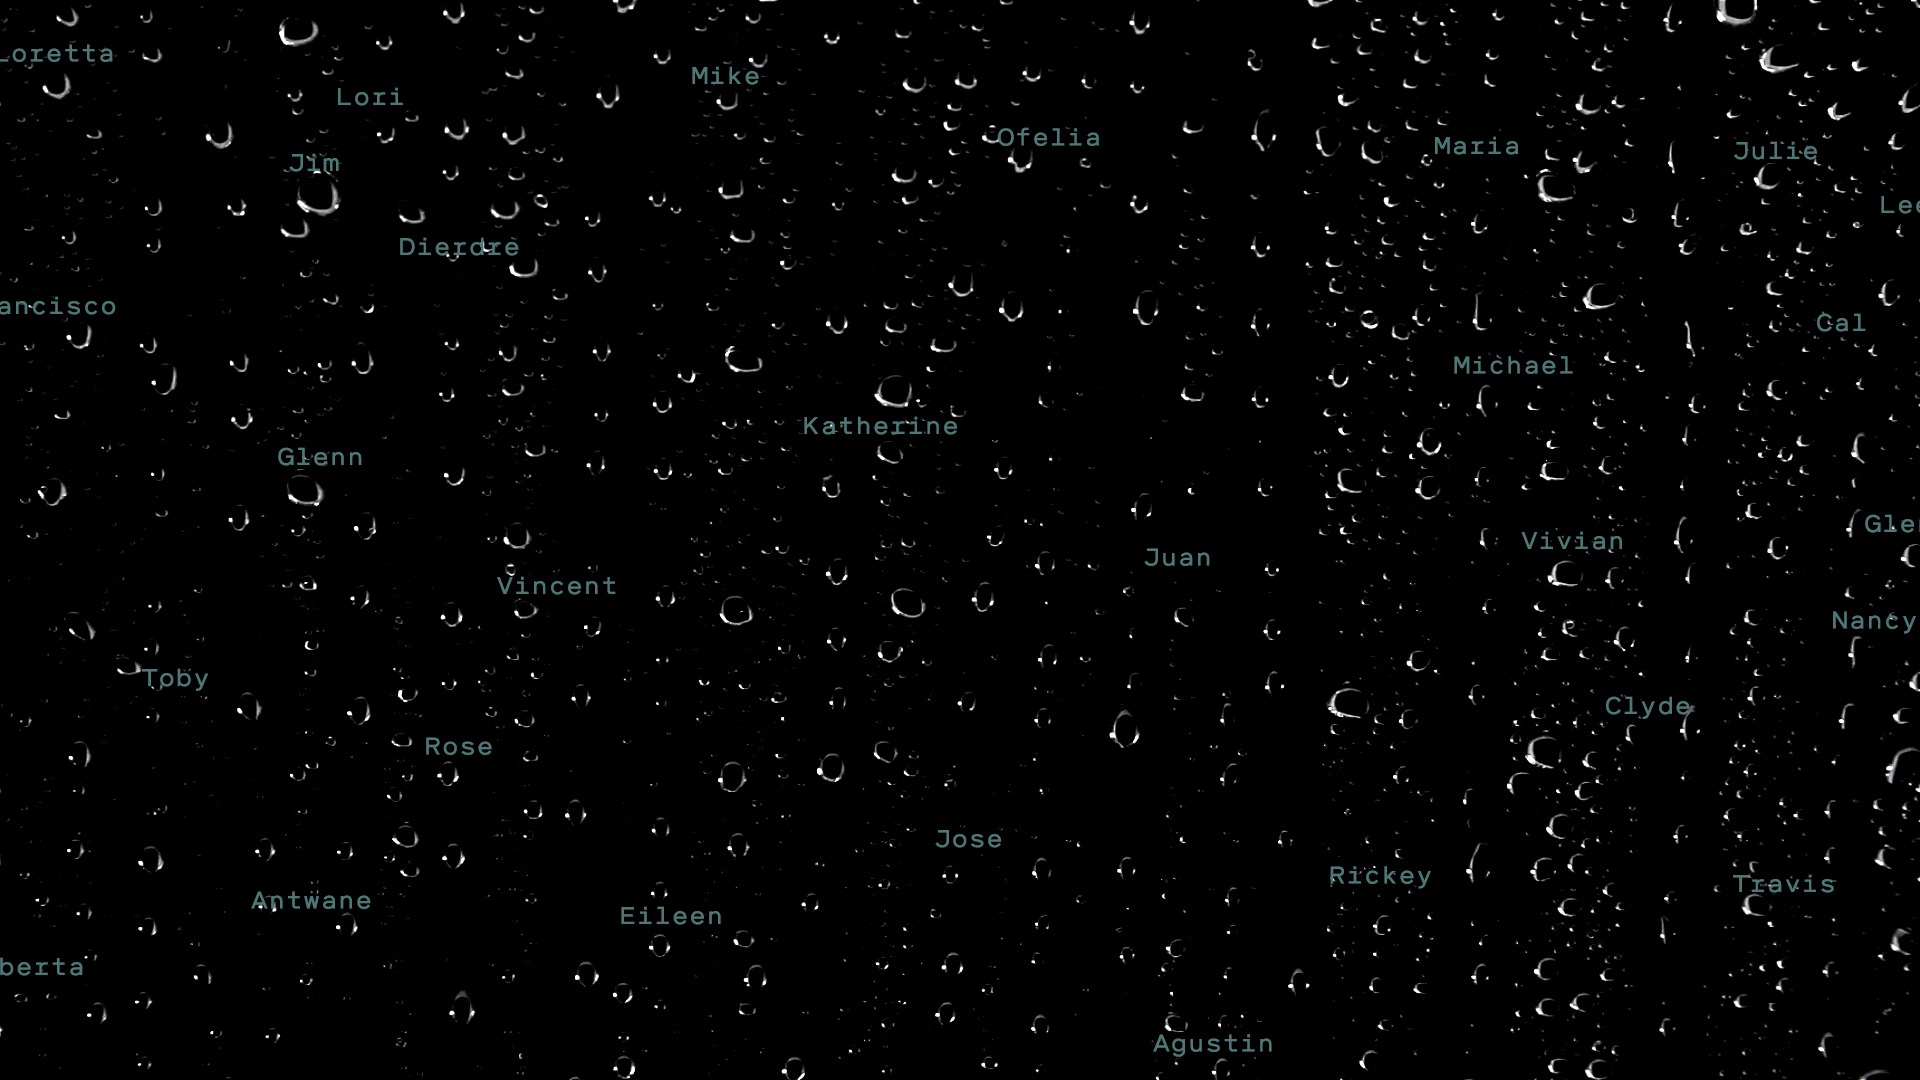 gif of raindrops falling on black window with names periodically apeparing from behind online coronavirus memorial